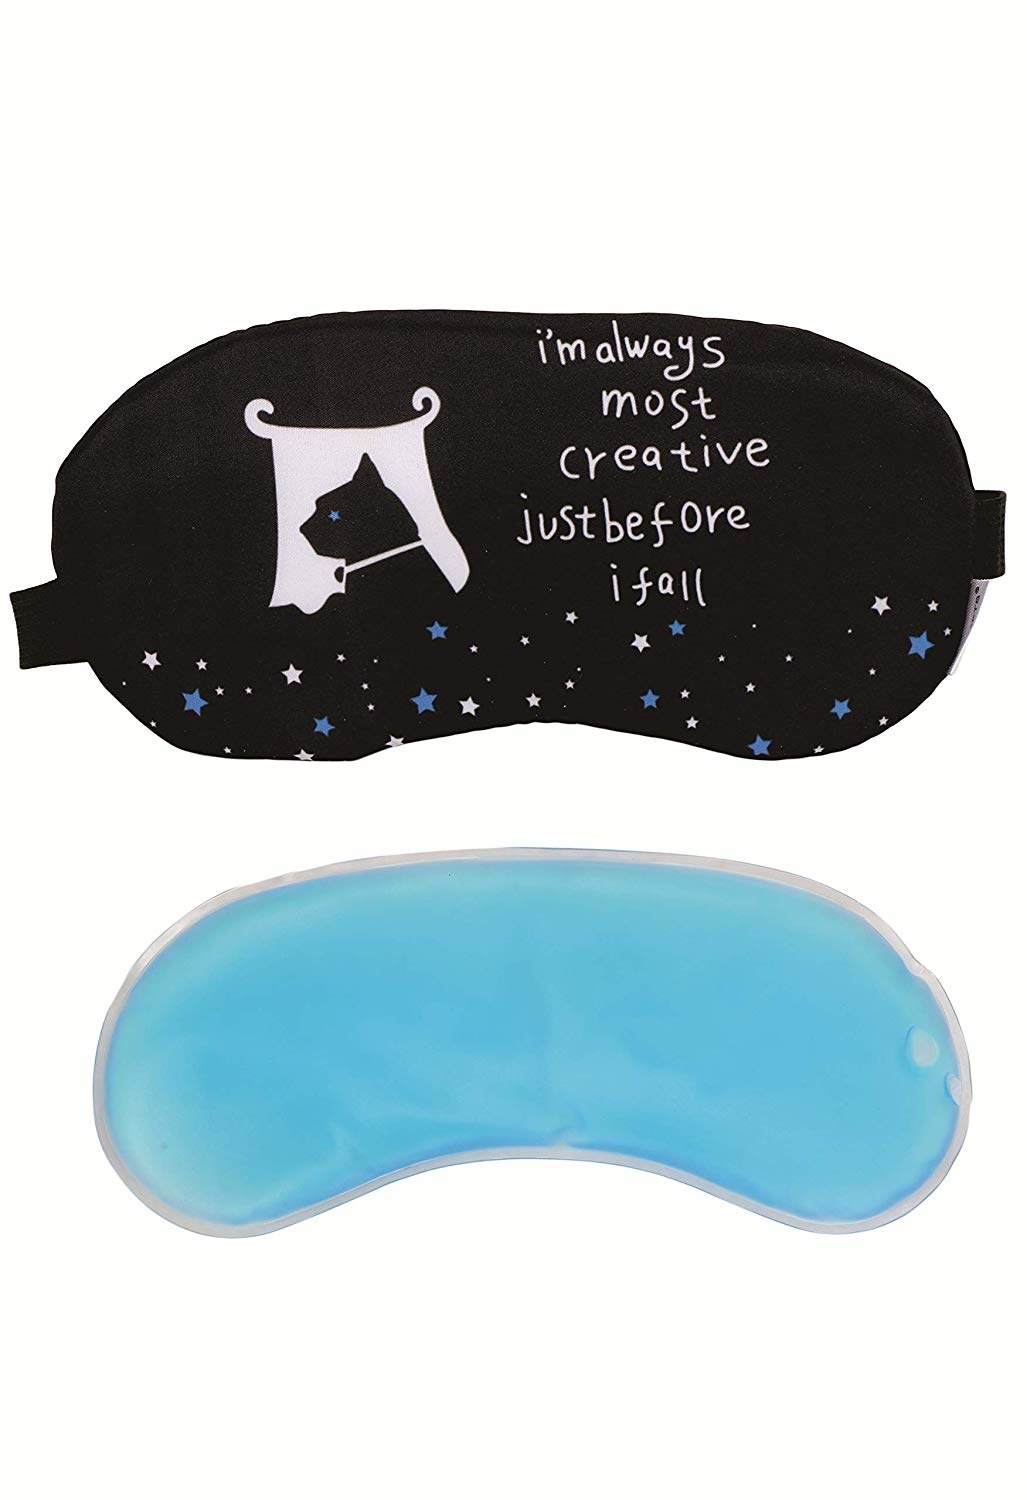 A black cat eye mask with a blue cooling gel pad